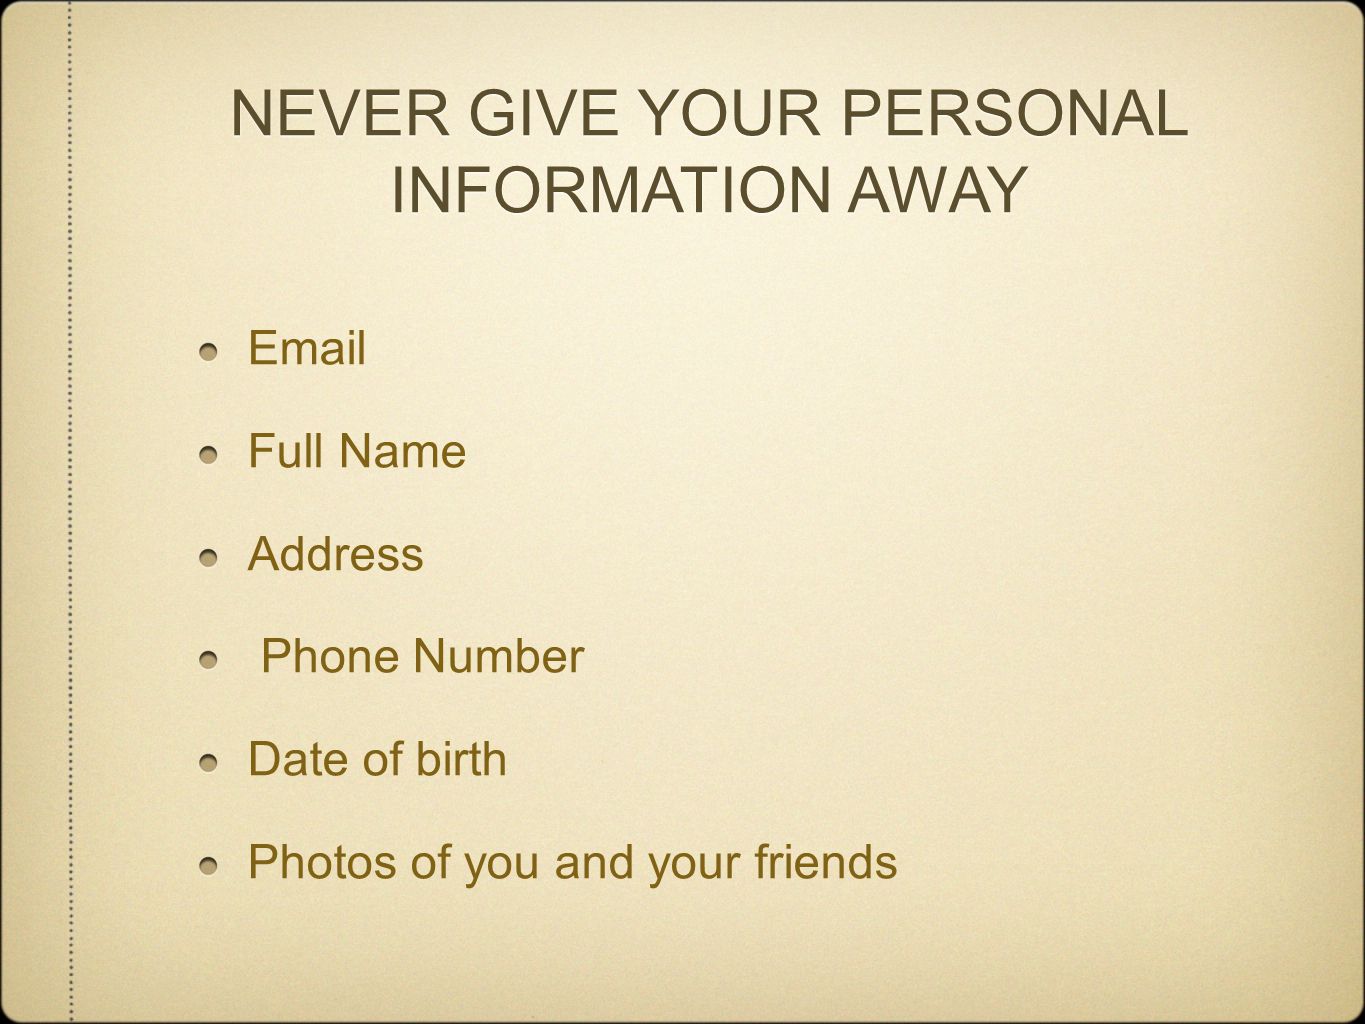 NEVER GIVE YOUR PERSONAL INFORMATION AWAY